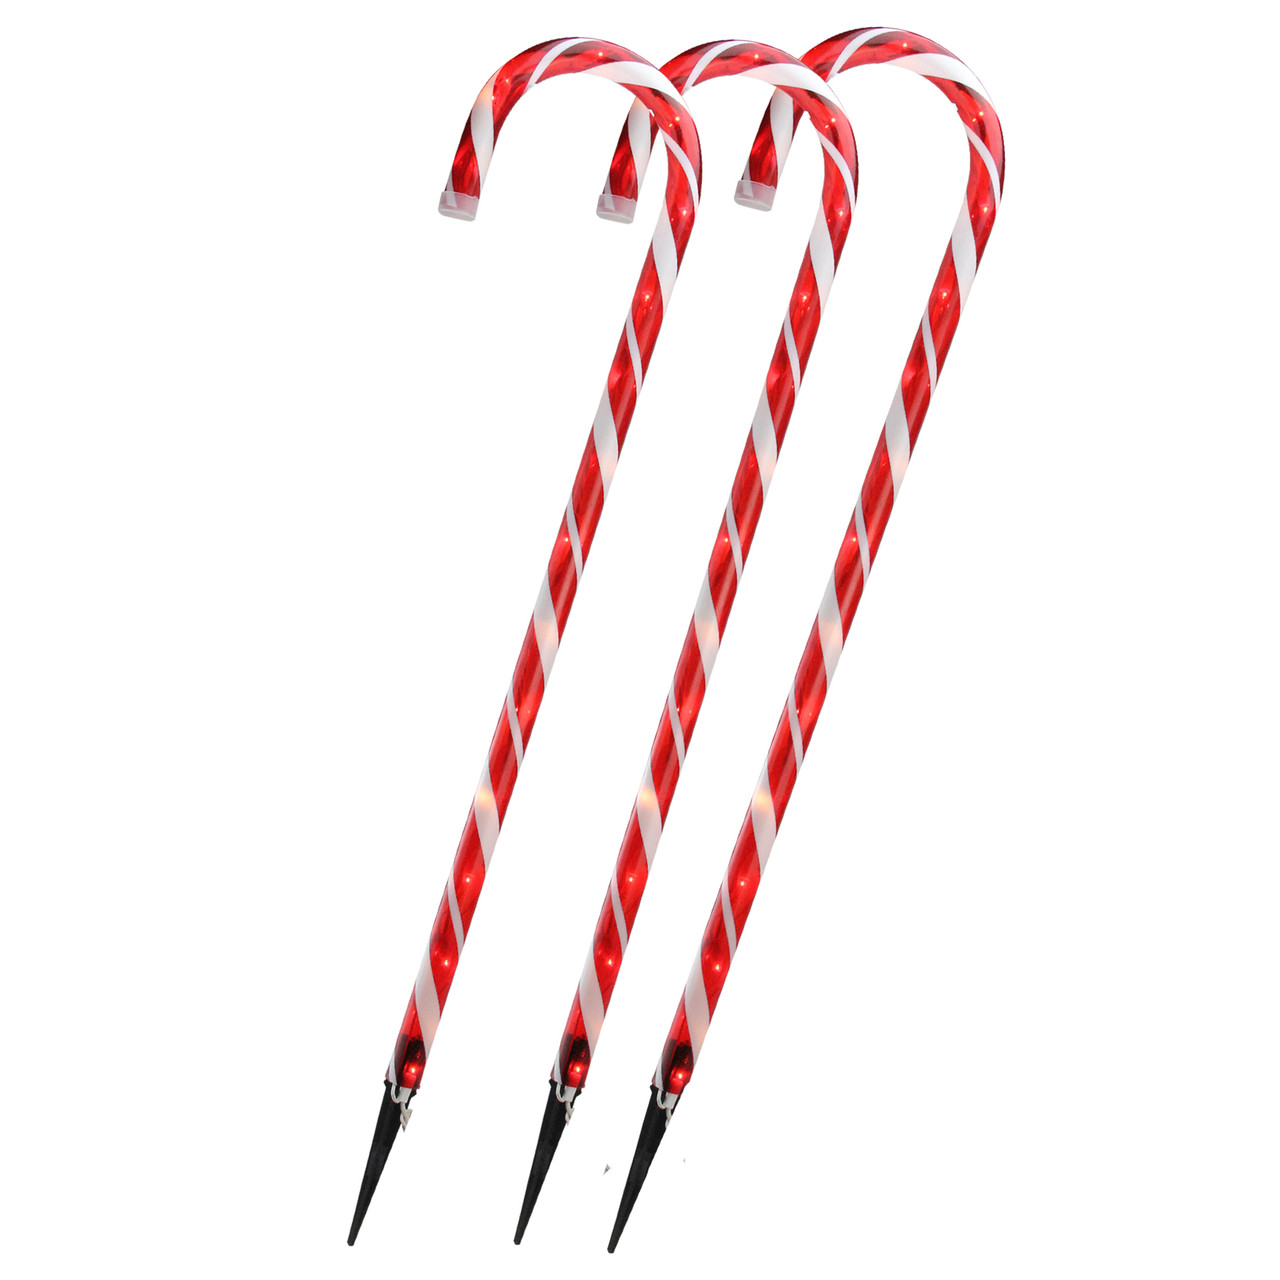 Christmas Candy Cane Yard Signs Garden Stake The Holiday Aisle